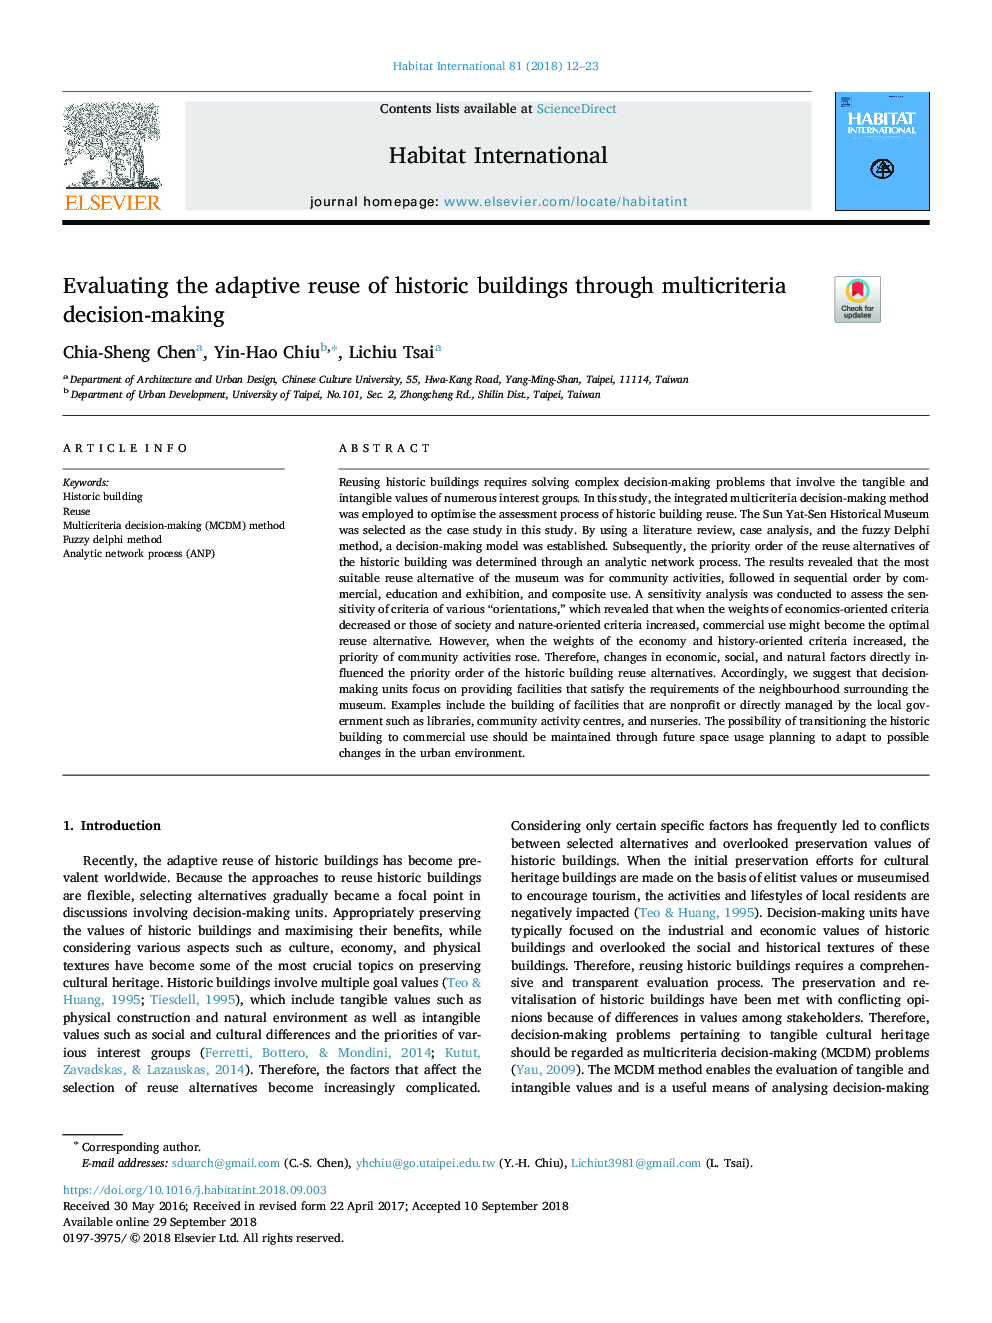 Evaluating the adaptive reuse of historic buildings through multicriteria decision-making